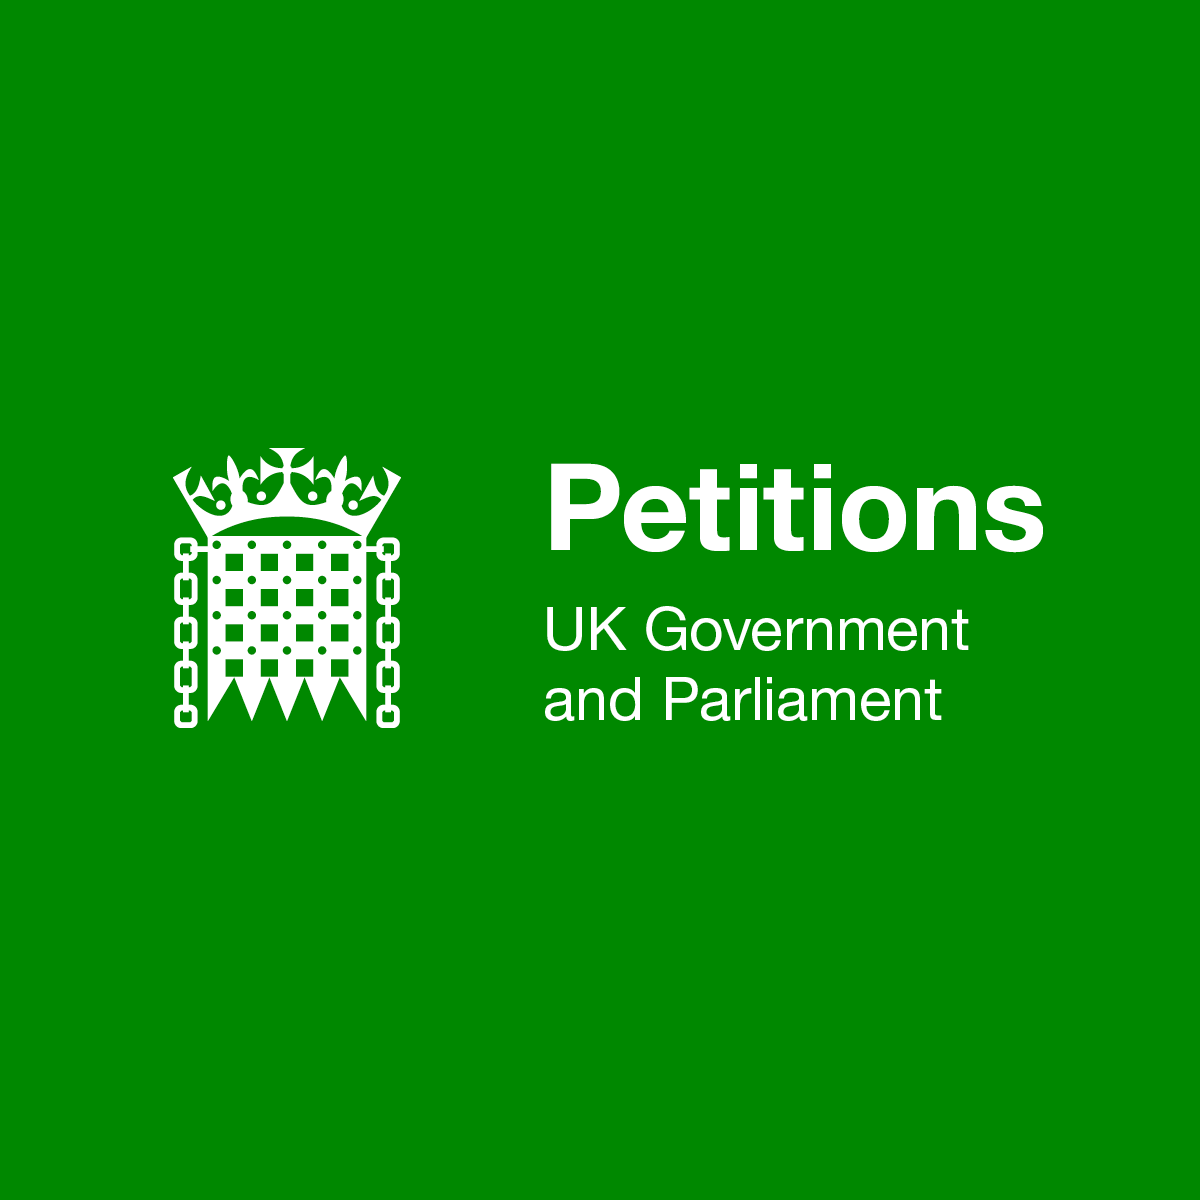 UK Government and Parliament Petitions